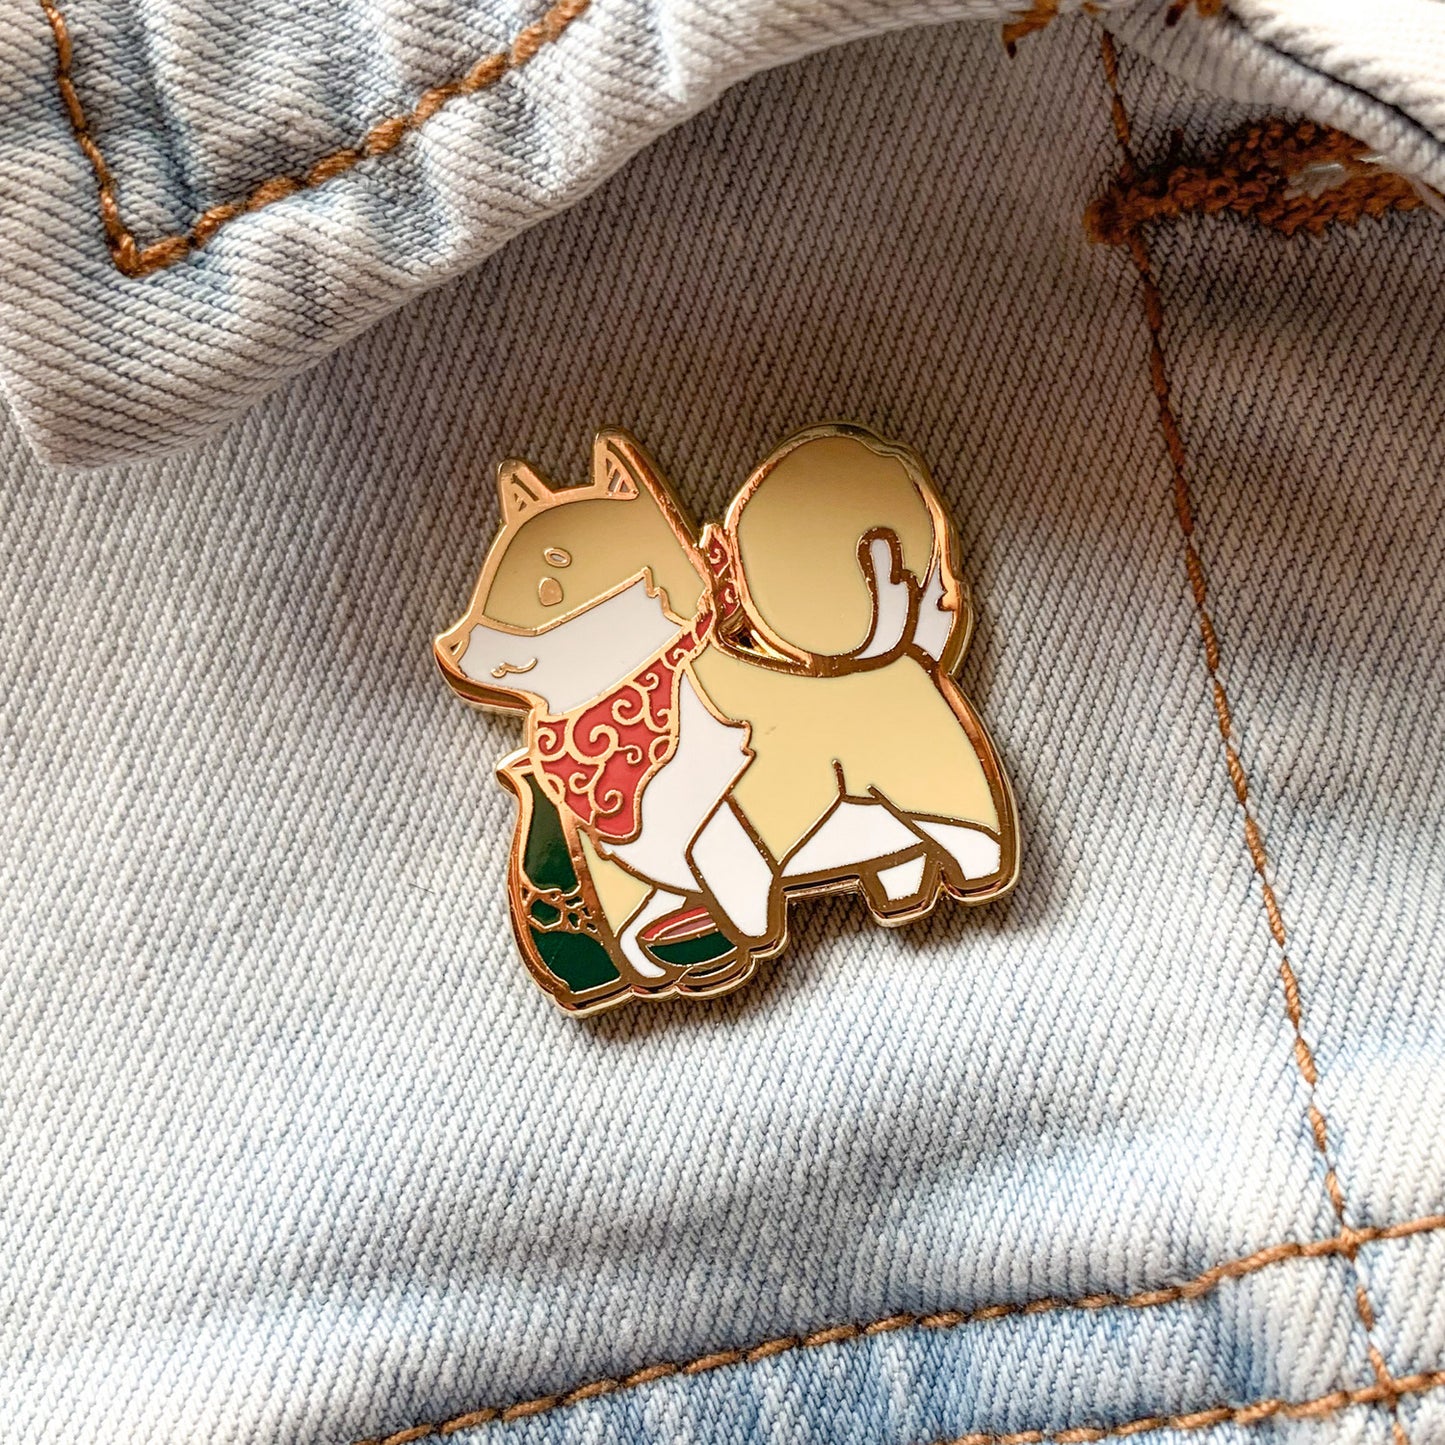 Shiba Inu and Sake Cocktail Hard Enamel Pin by Cocktail Critters on Denim